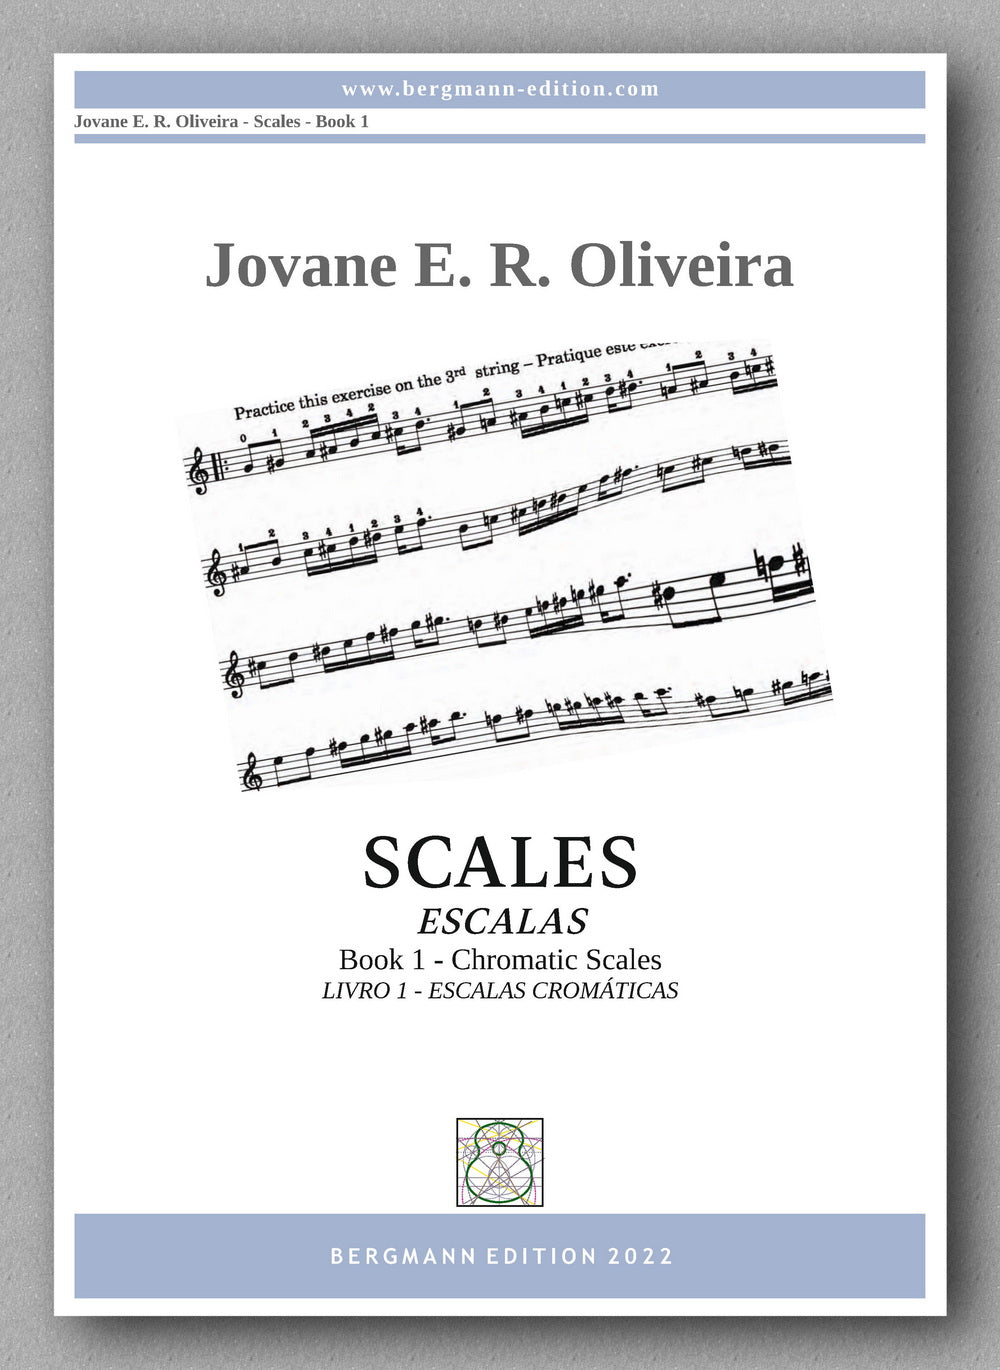 Scales, Book 1 - Cromatic Scales, by Jovane E.R. Oliveira - Cover